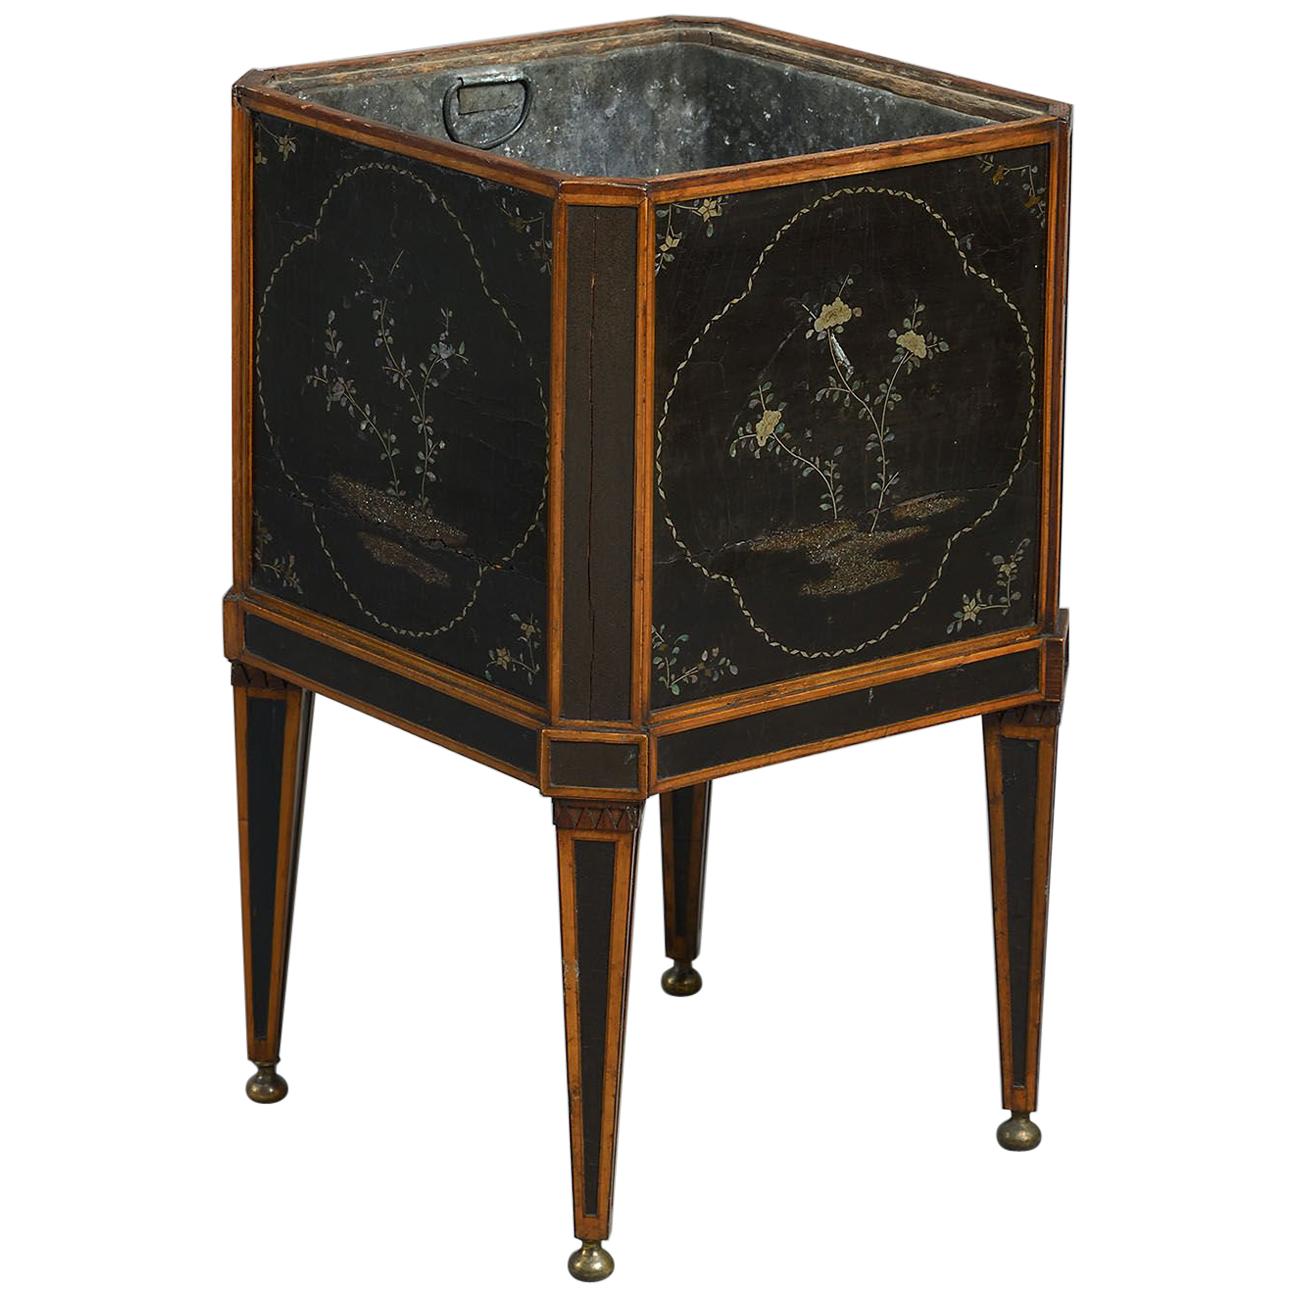 18th Century Dutch Lacquer-Mounted Teestoof, Jardinière or Wine Cooler